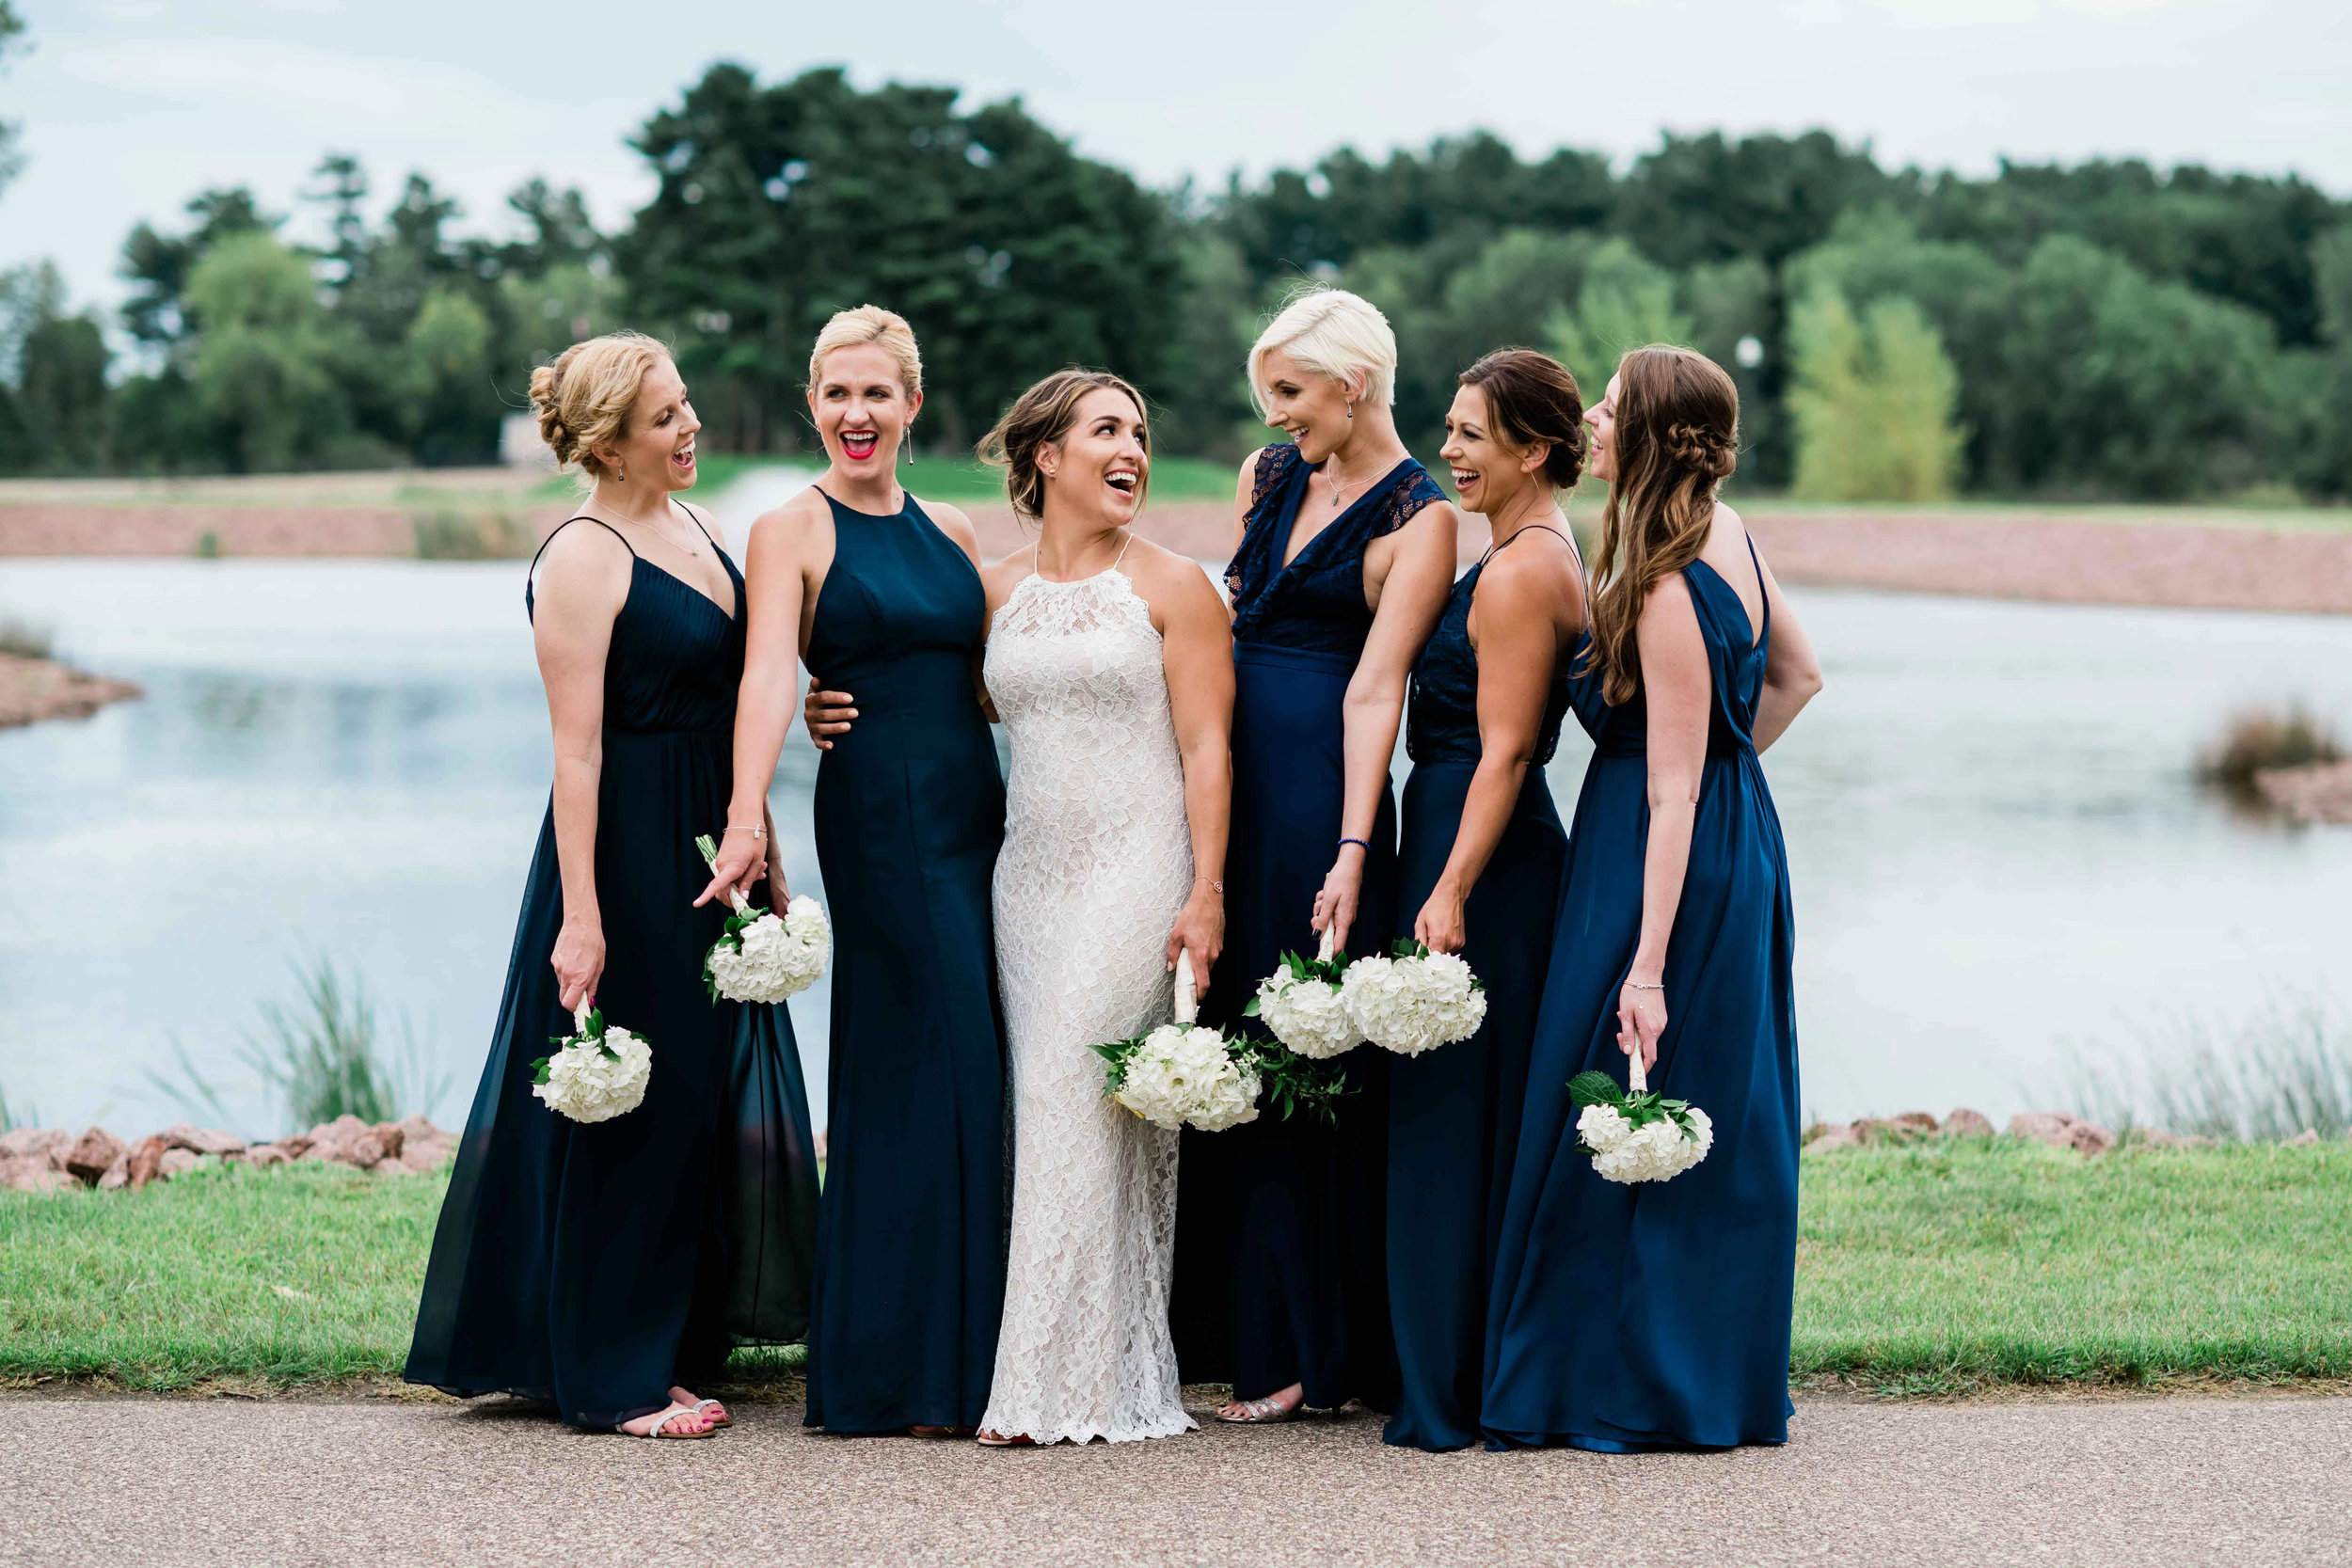 Bride and bridesmaids hold bouquets down as they laugh with each other